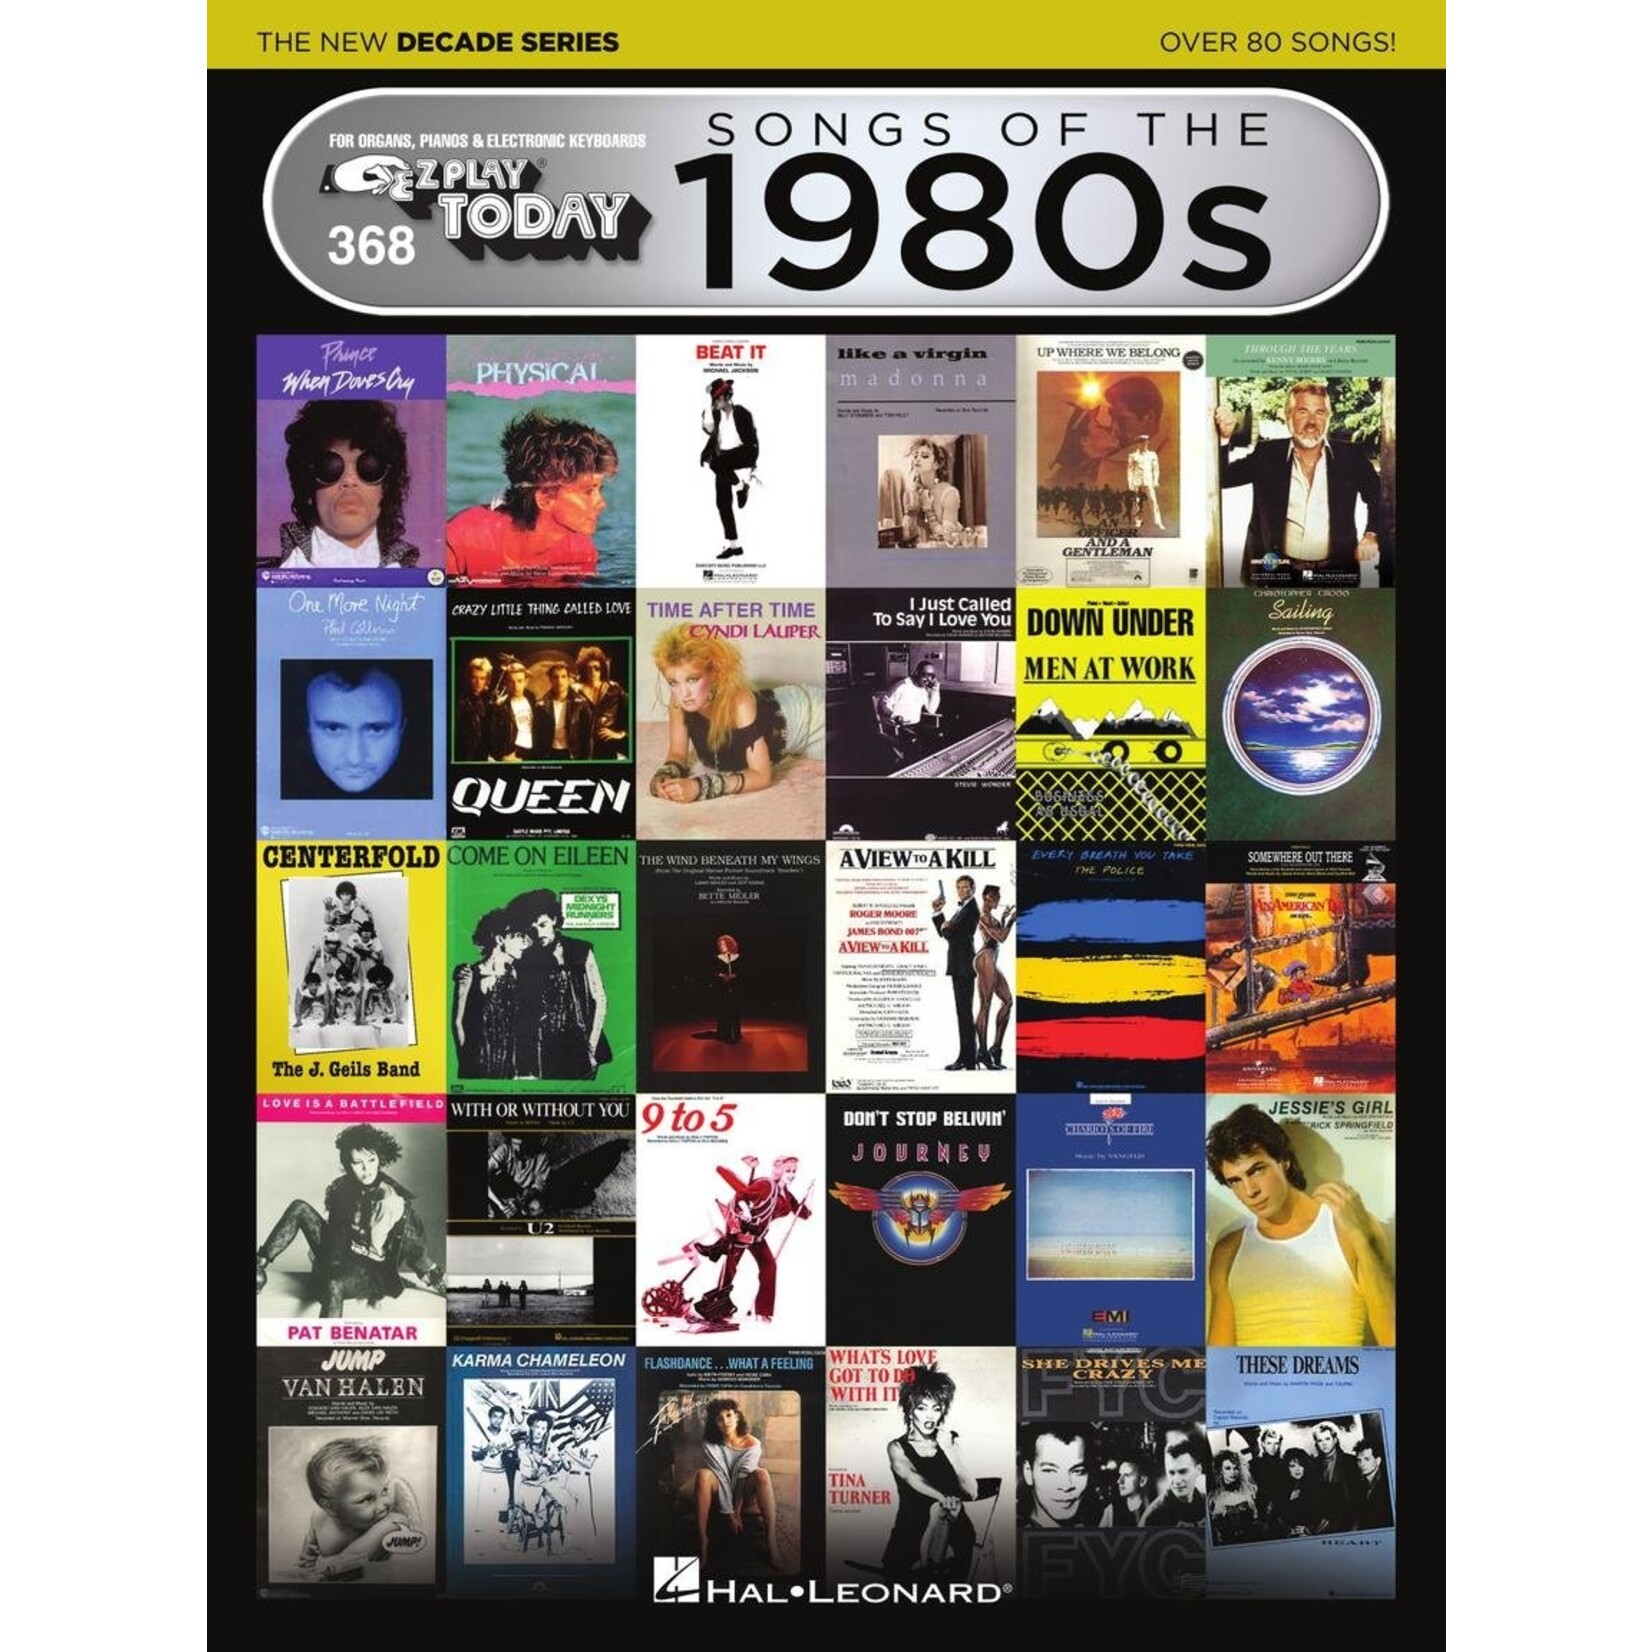 Songs of the 1980s The New Decade Series E-Z Play® Today Volume 368